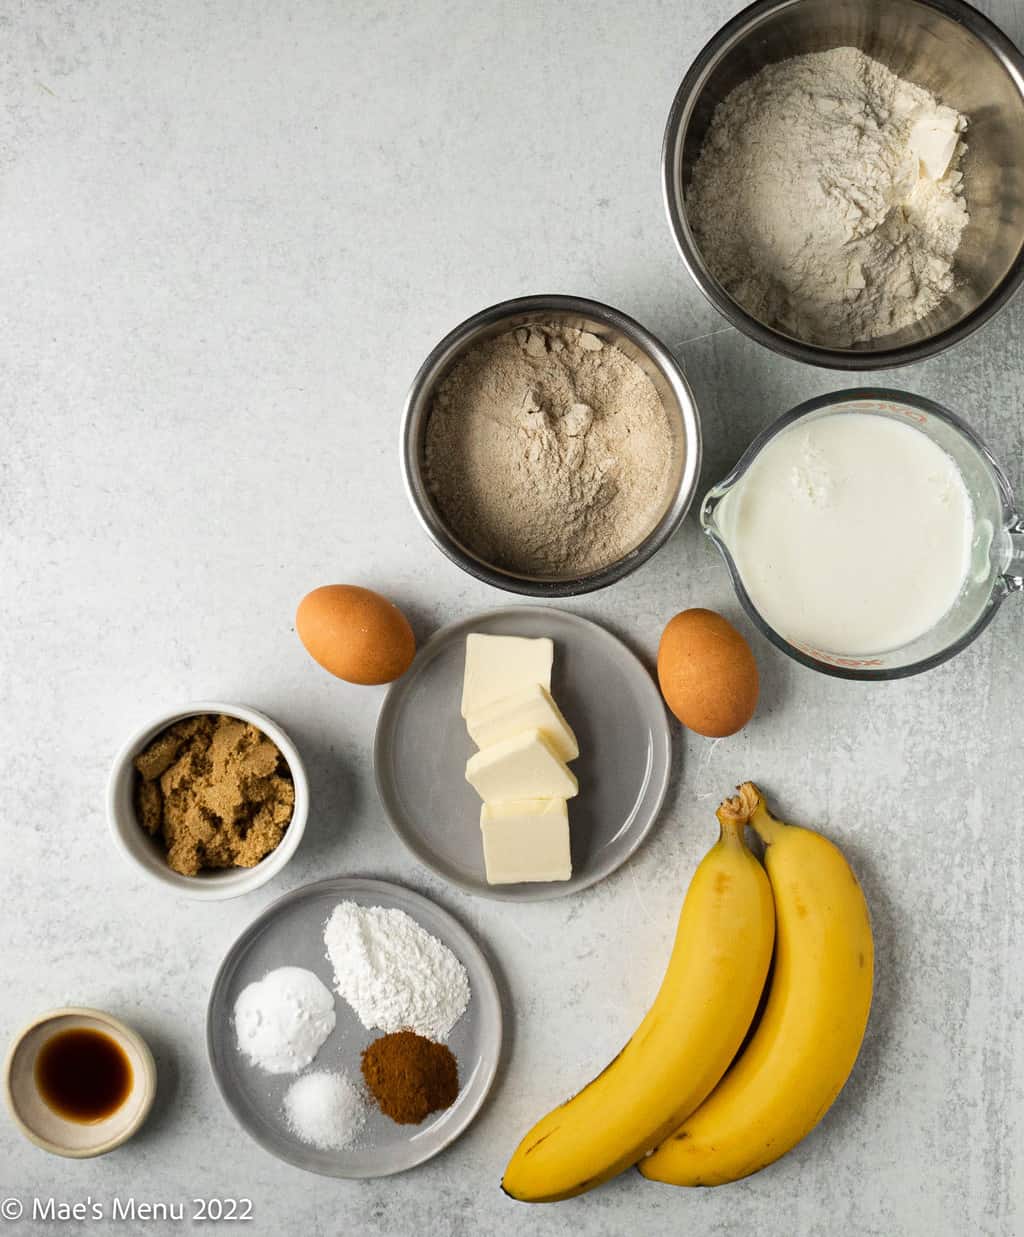 All of the ingredients for the banana waffles, flours, buttermilk, eggs, butter, light brown sugar, bananas, vanilla extract, baking soda and baking powder, salt, and cinnamon